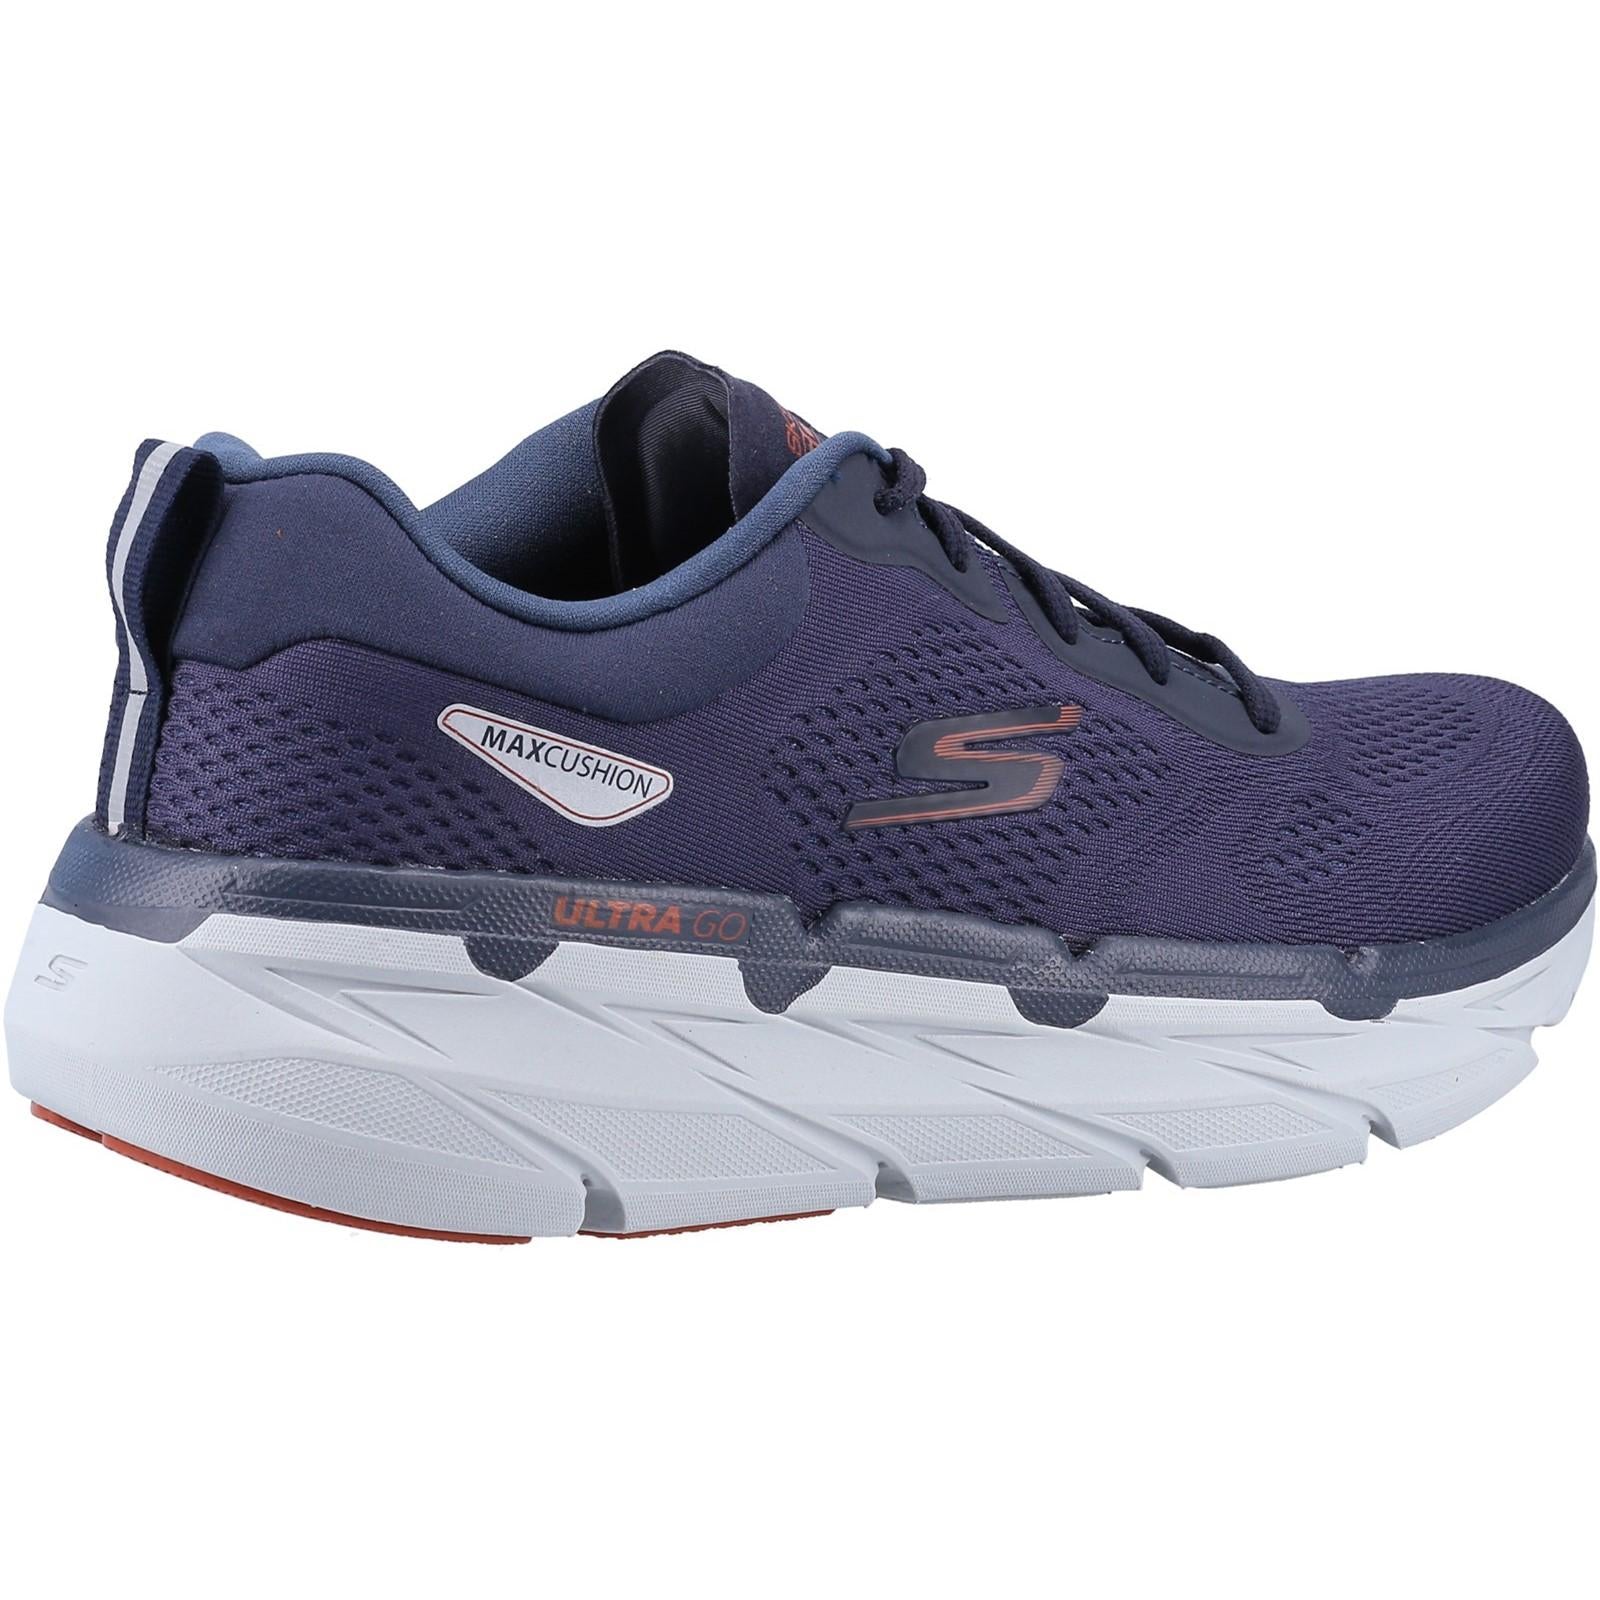 Skechers Max Cushioning Premier Perspective Trainer